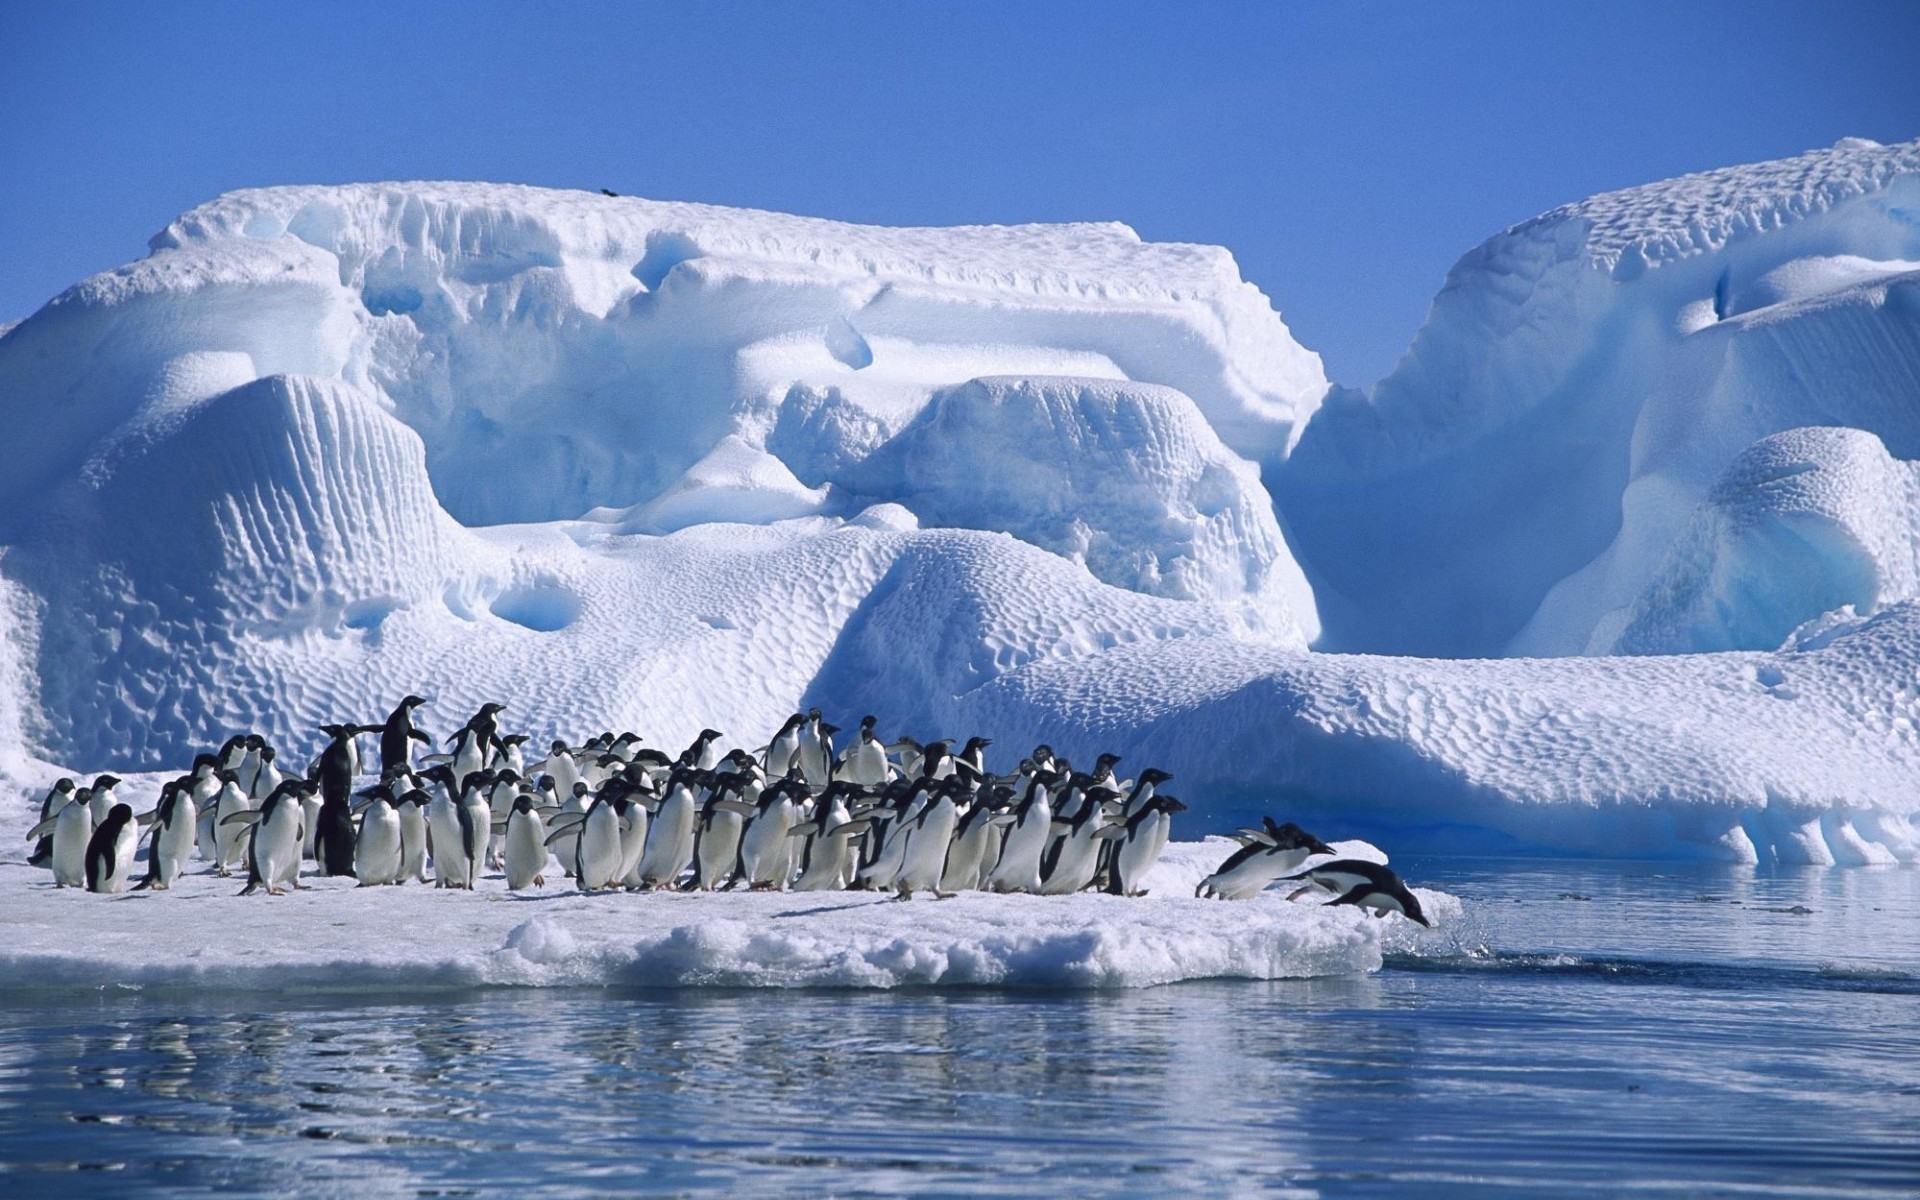 animals snow ice winter cold iceberg water frosty frozen glacier outdoors landscape polar scenic travel frost mountain daylight nature penguins ice landscape penguins world penguins pics